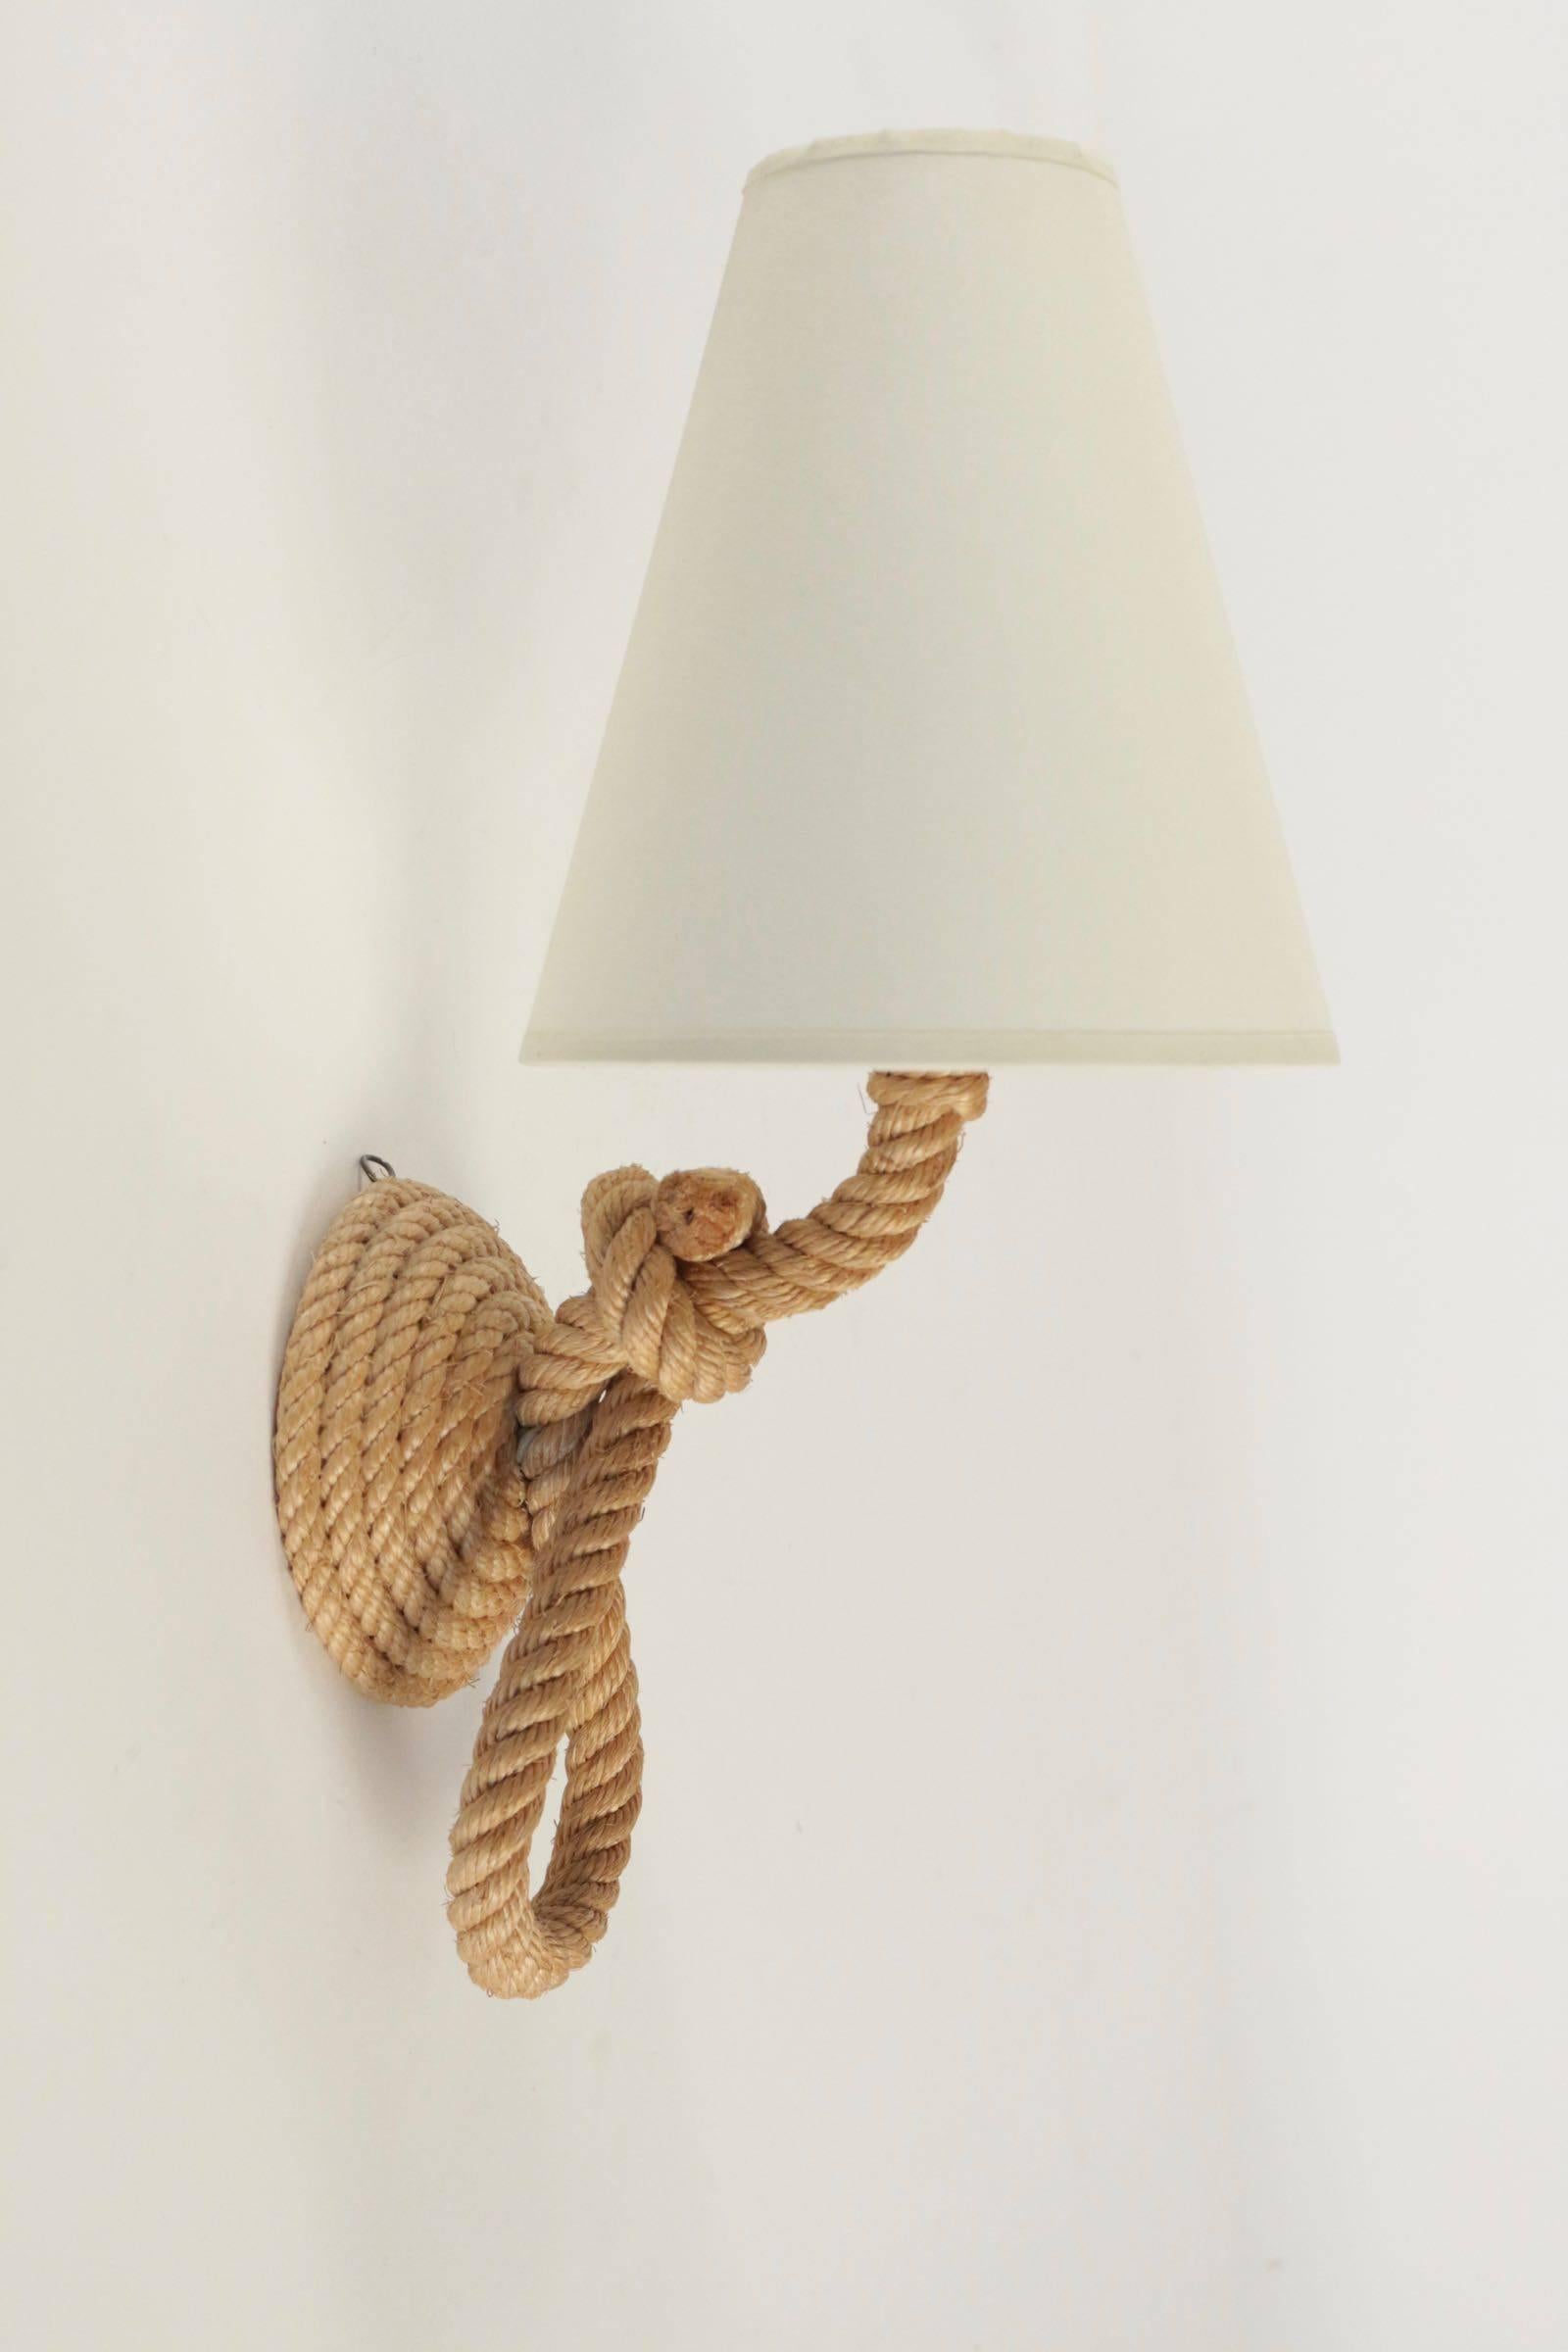 1950s Audoux and Minet pair of rope sconces.
Off-white cotton lampshade.

One bulb per sconces.